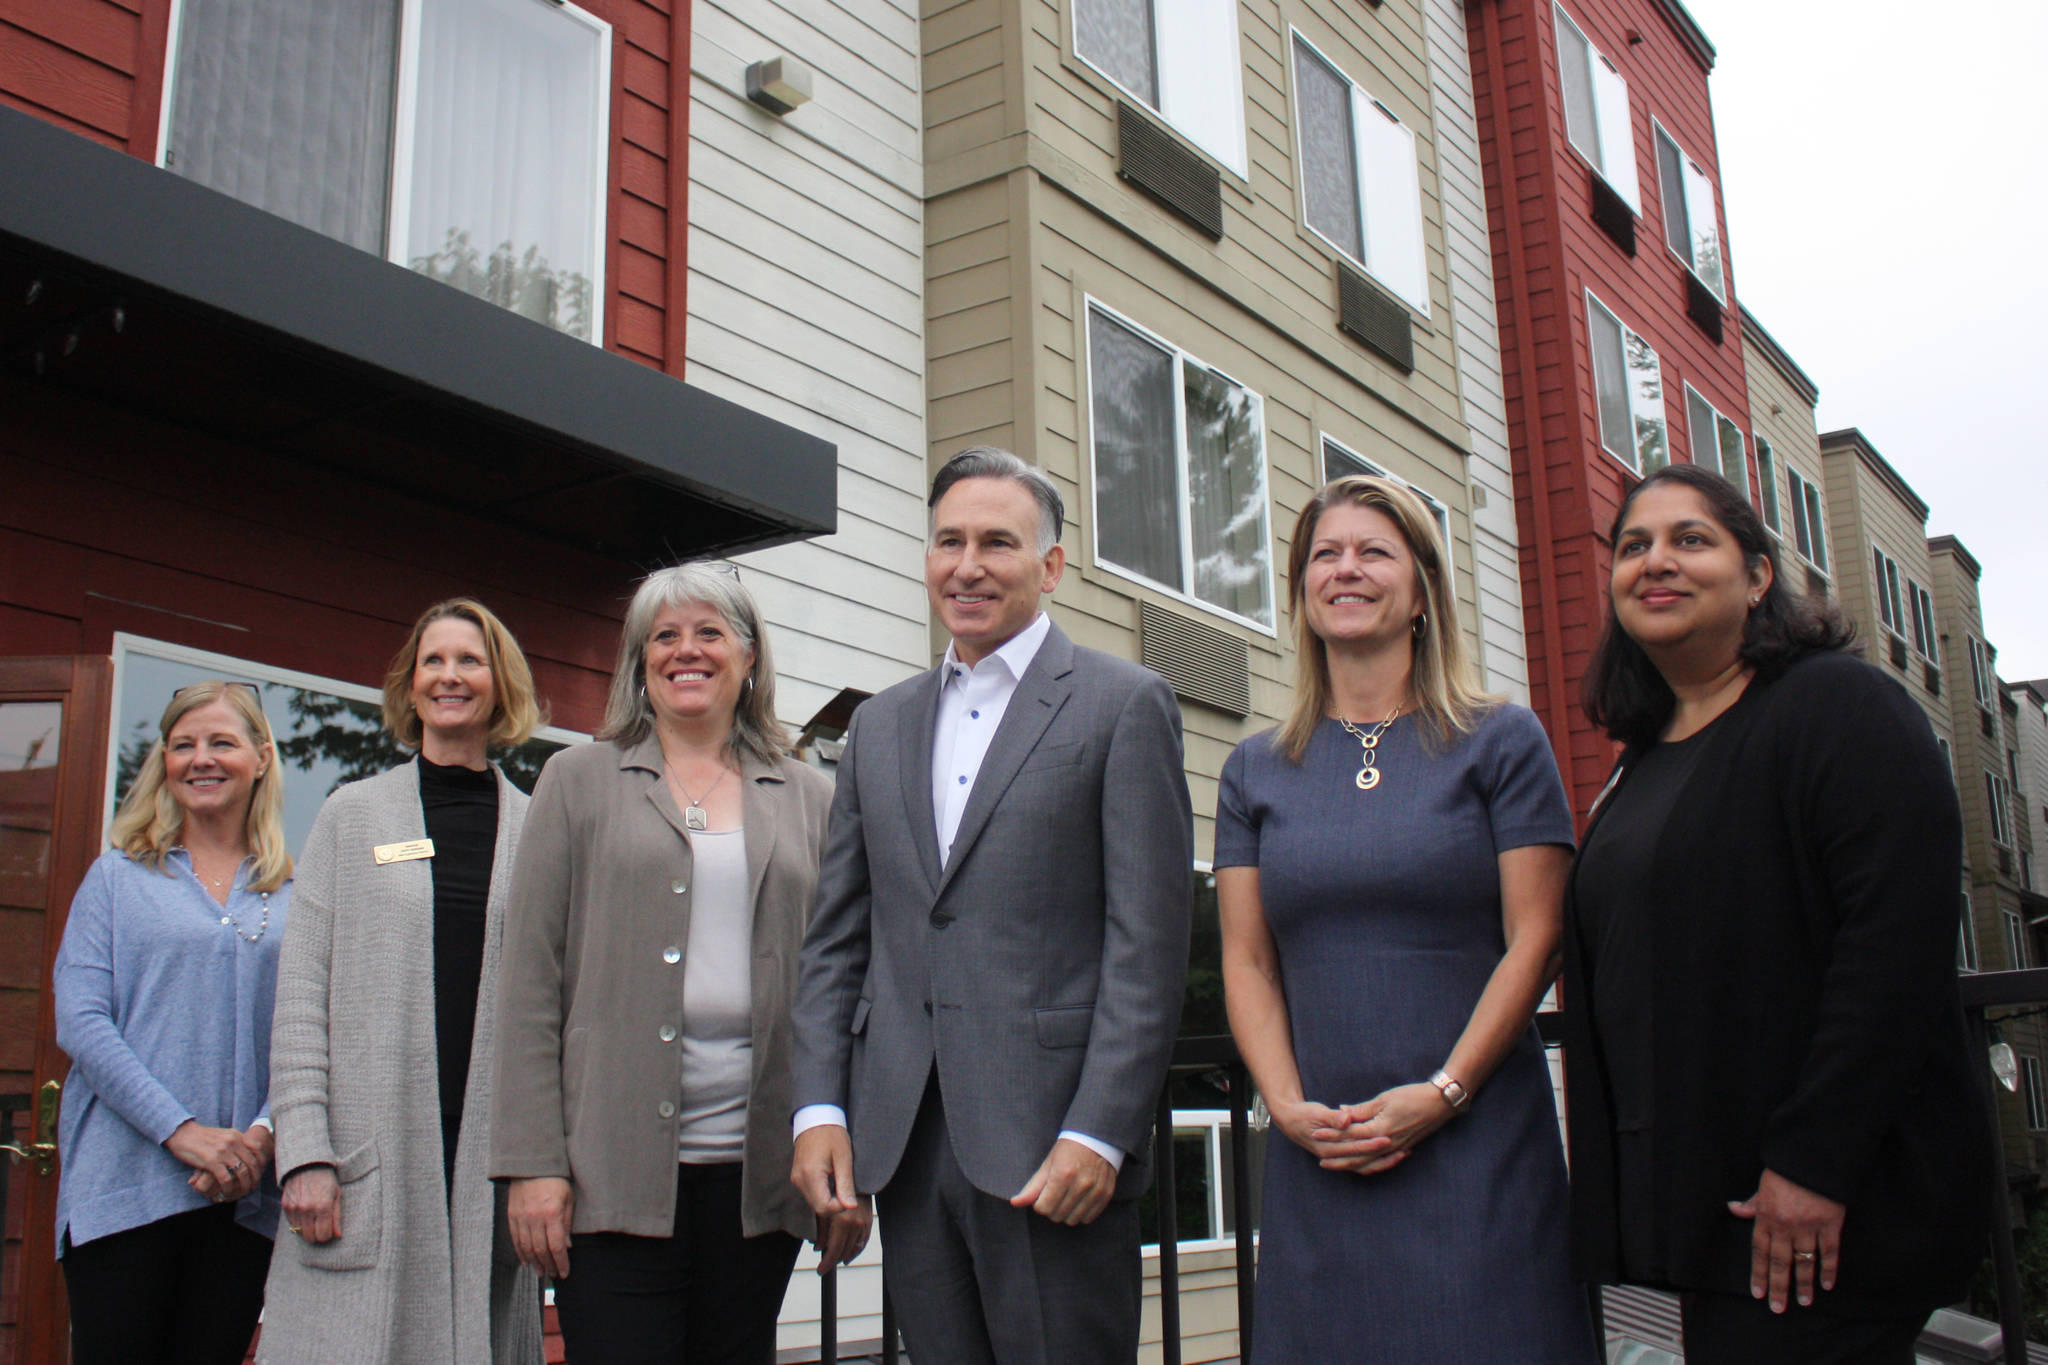 (left to right) Microsoft Philanthropies Director, Jane Broom, Sen. Patty Kuderer (D-Bellevue), King County Council member, Claudia Balducci, King County Executive, Dow Constantine, Redmond Mayor, Angela Birney, Redmond City Council member, Tanika Padhye (out of frame: Redmond City Council Member Jeralee Anderson) pose in front of newly acquired housing facility. (photo credit: Cameron Sheppard)